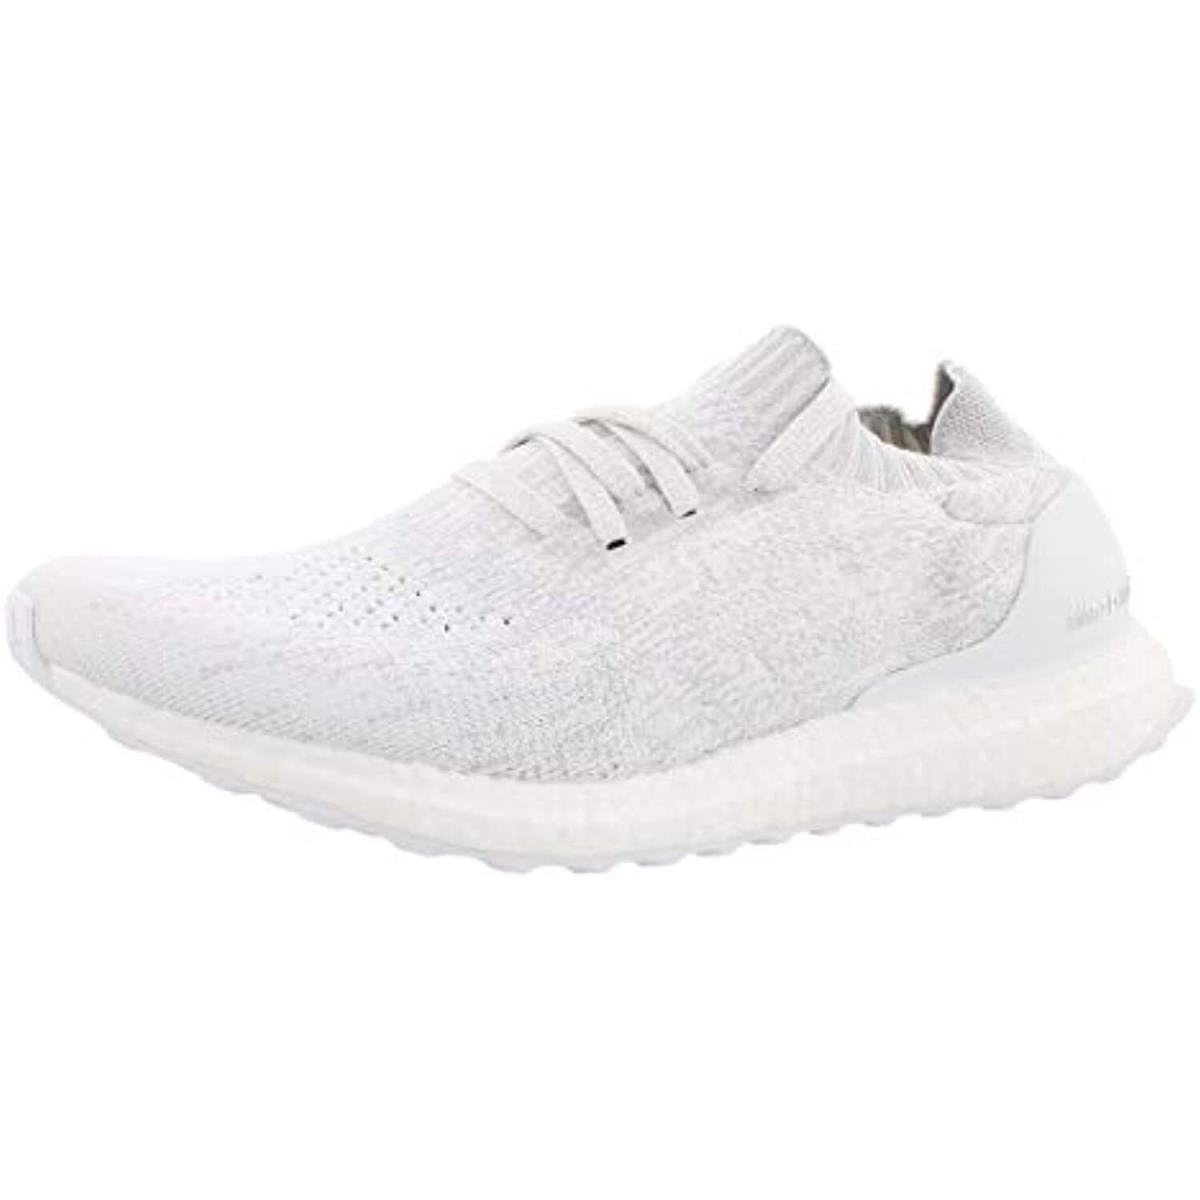 Adidas Men`s Ultraboost Uncaged Shoe 9 White/crystal White BY2549 US 8.5-9.5